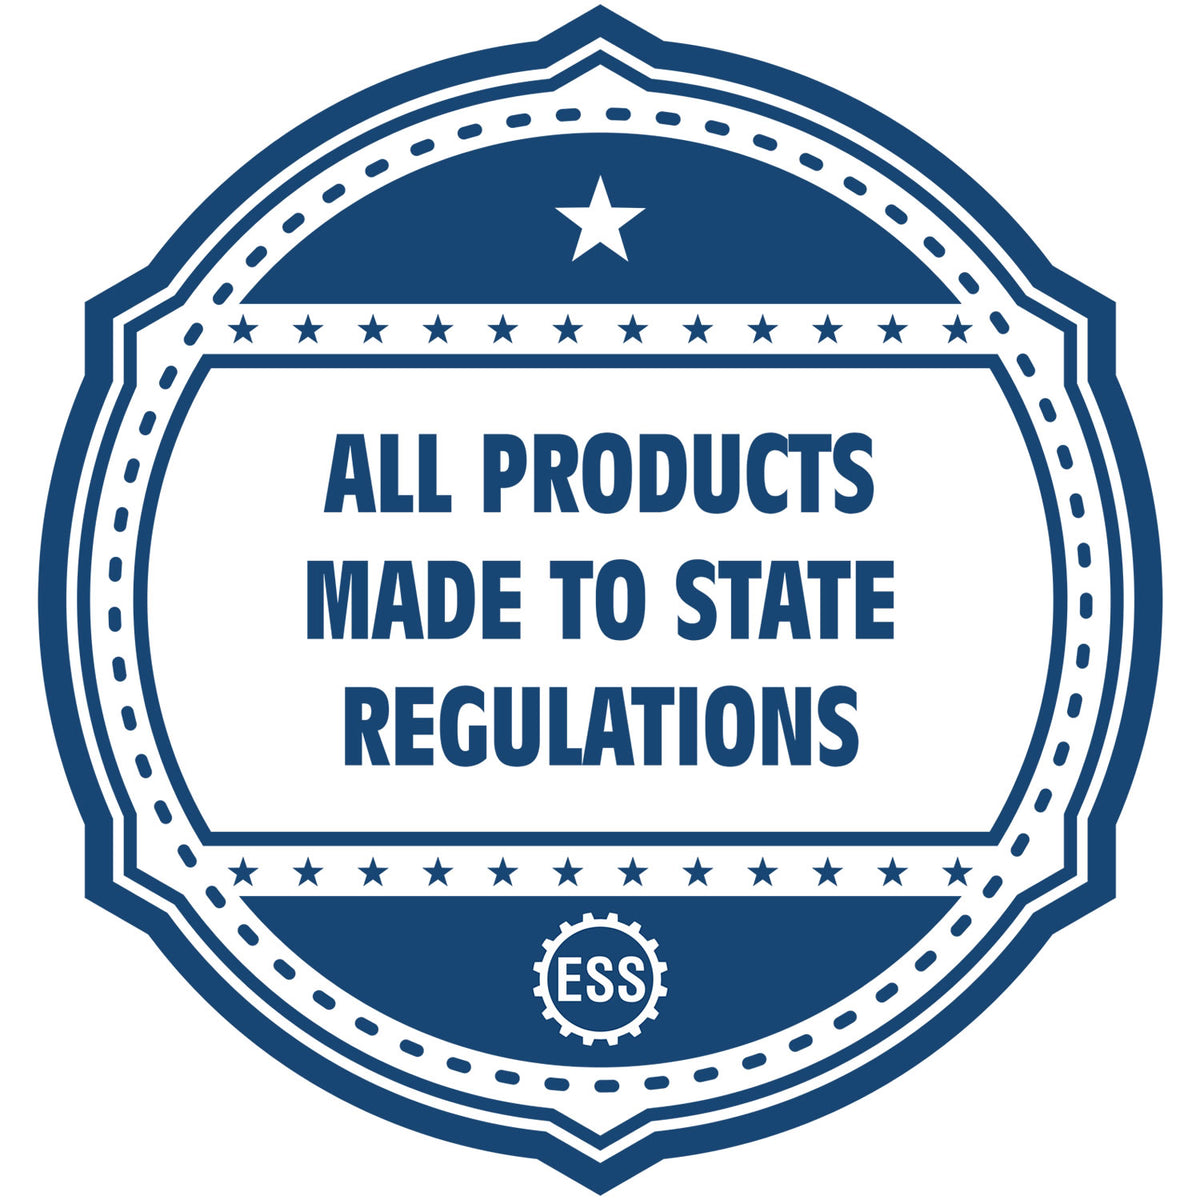 An icon or badge element for the Super Slim Alaska Notary Public Stamp showing that this product is made in compliance with state regulations.